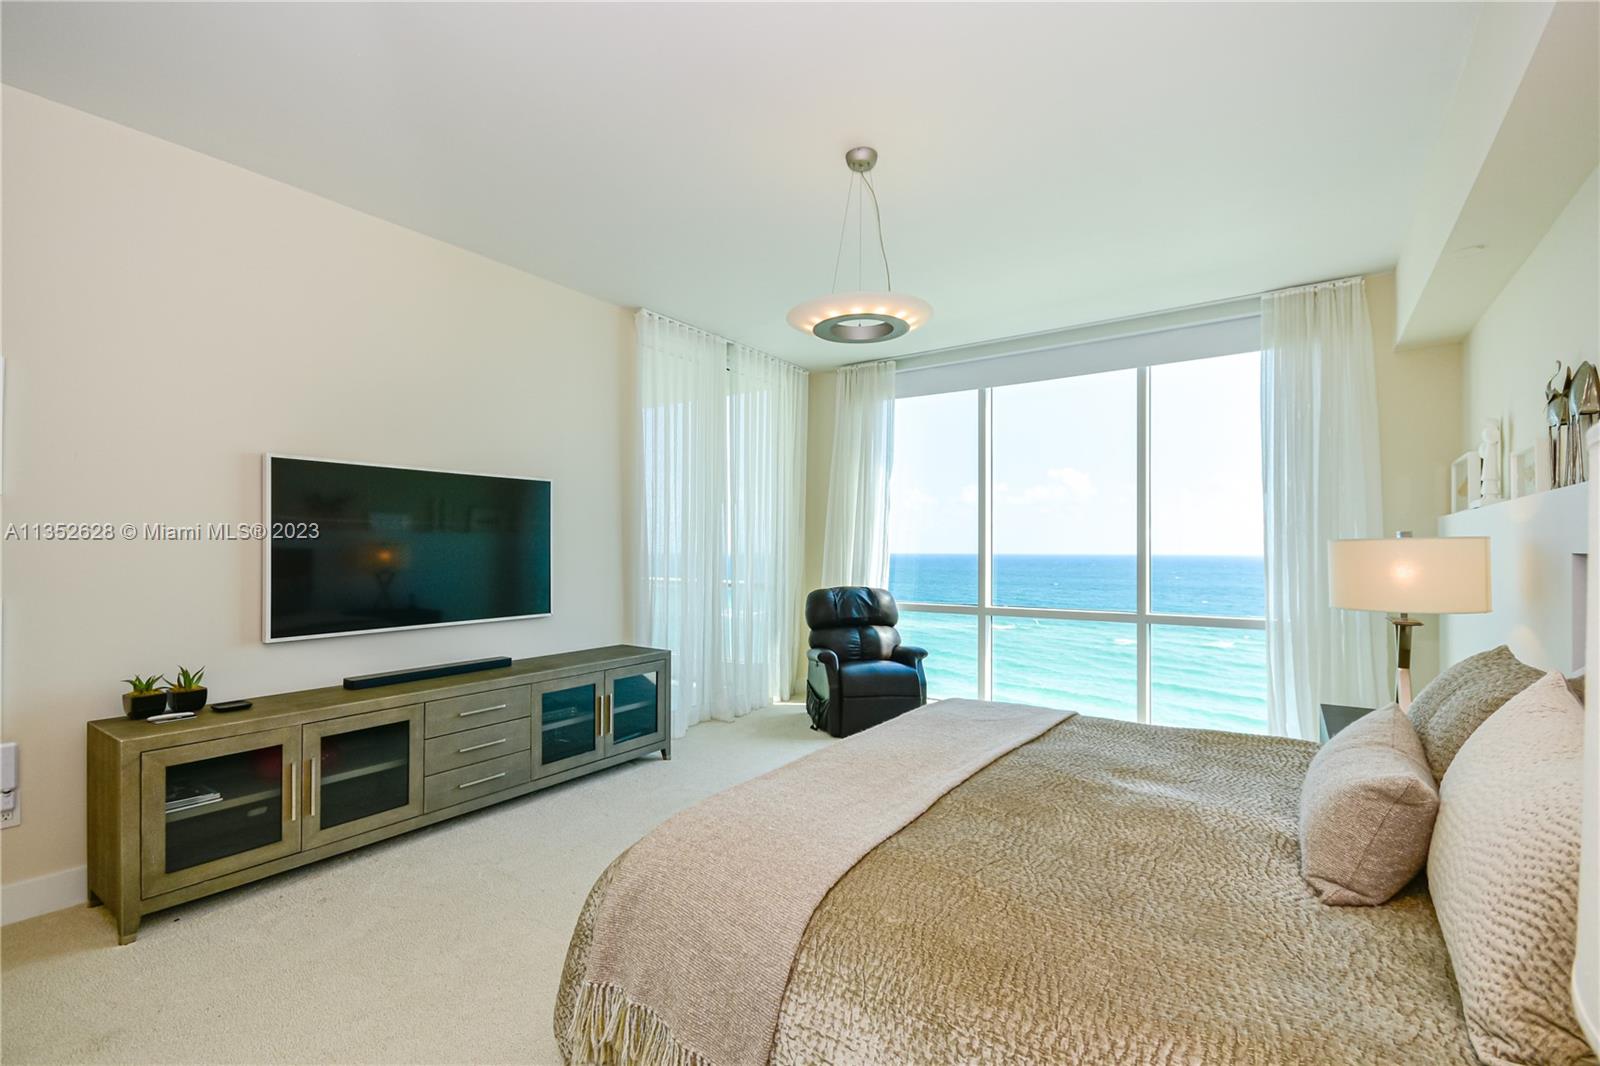 16051 Collins Ave 704, Sunny Isles Beach, Florida 33160, 4 Bedrooms Bedrooms, ,6 BathroomsBathrooms,Residential,For Sale,16051 Collins Ave 704,A11352628